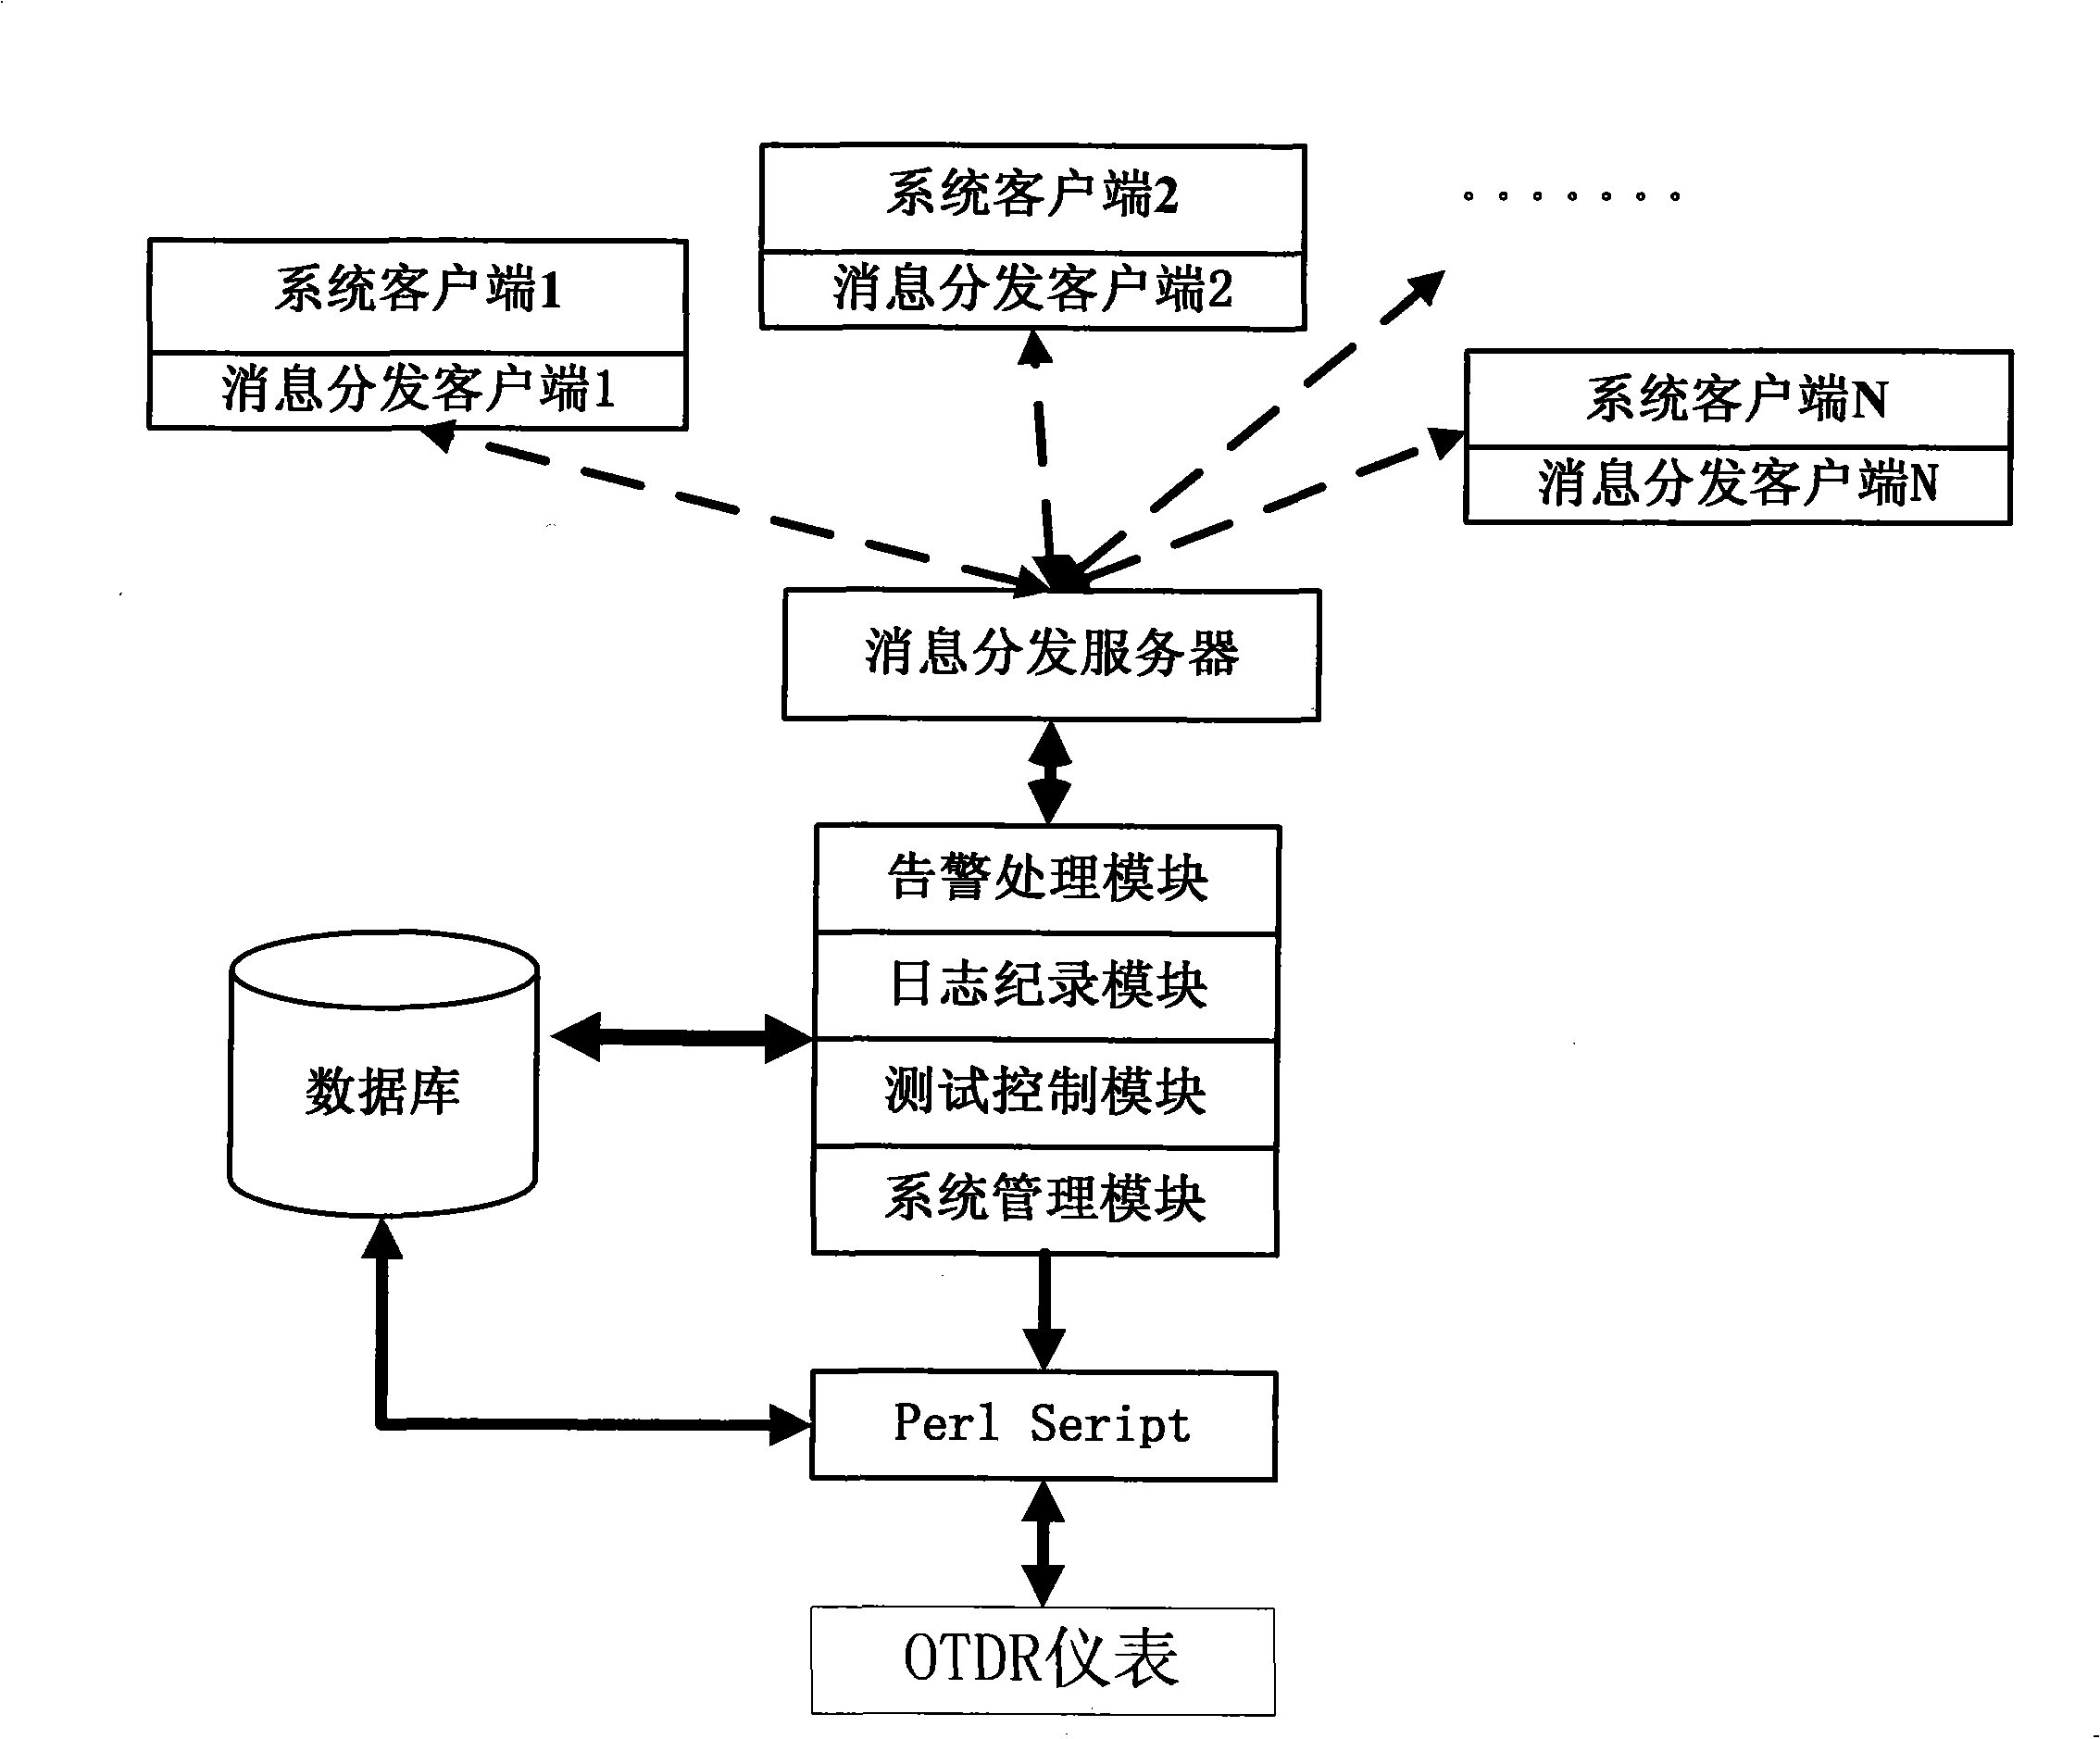 Optical cable monitoring device